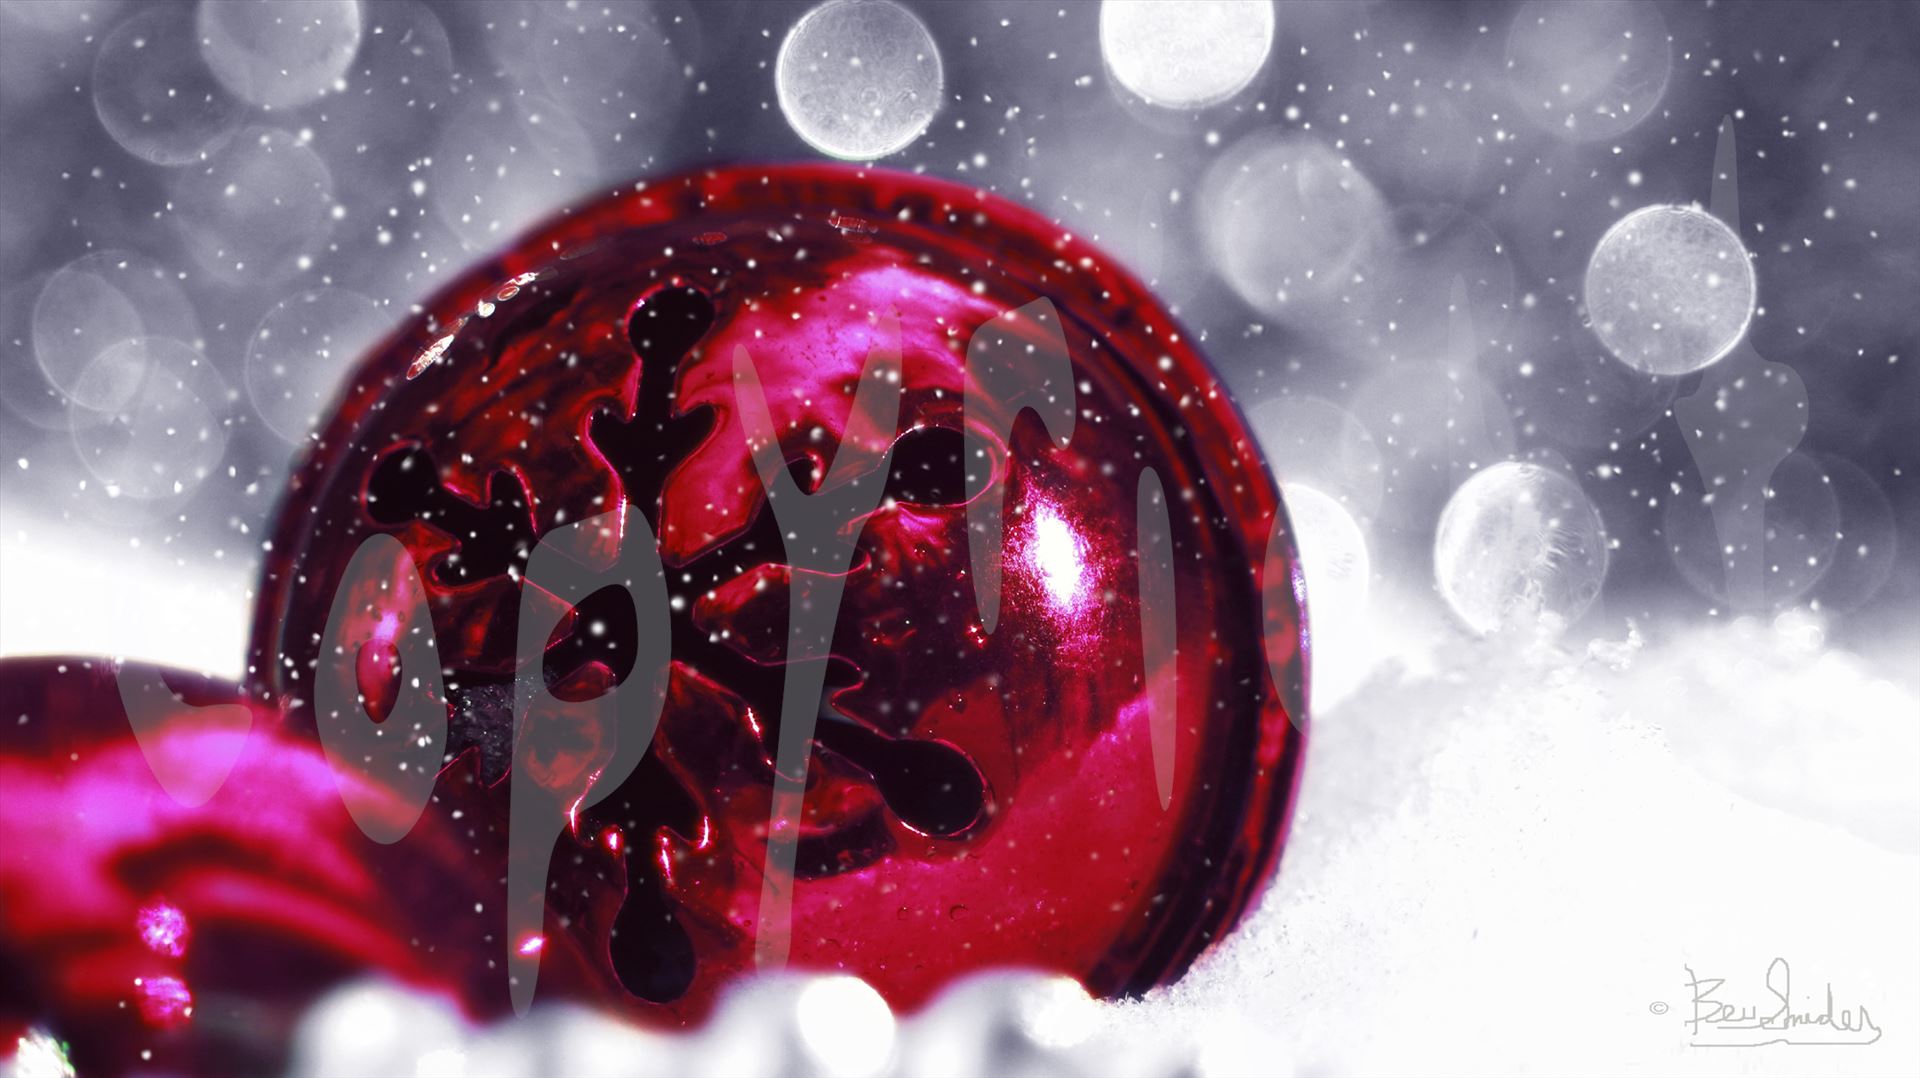 Fuschia Christmas Balls 6650 Fuschia Christmas Balls in the snow with bokeh background by Snookies Place of Wildlife and Nature